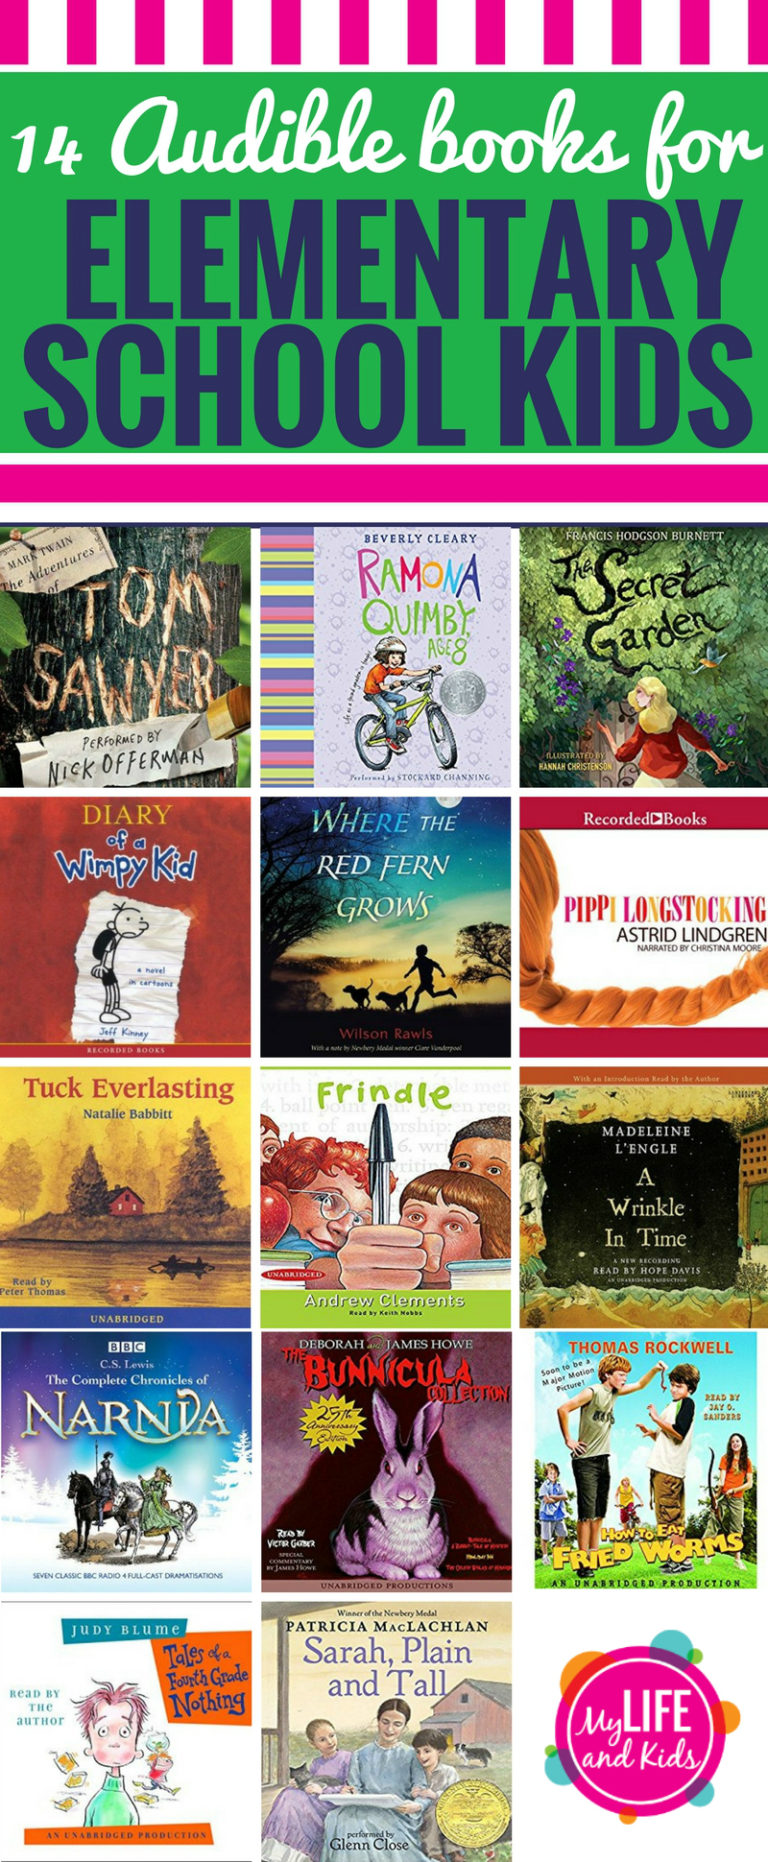 14 of the Best Audible Books for Kids in Elementary School